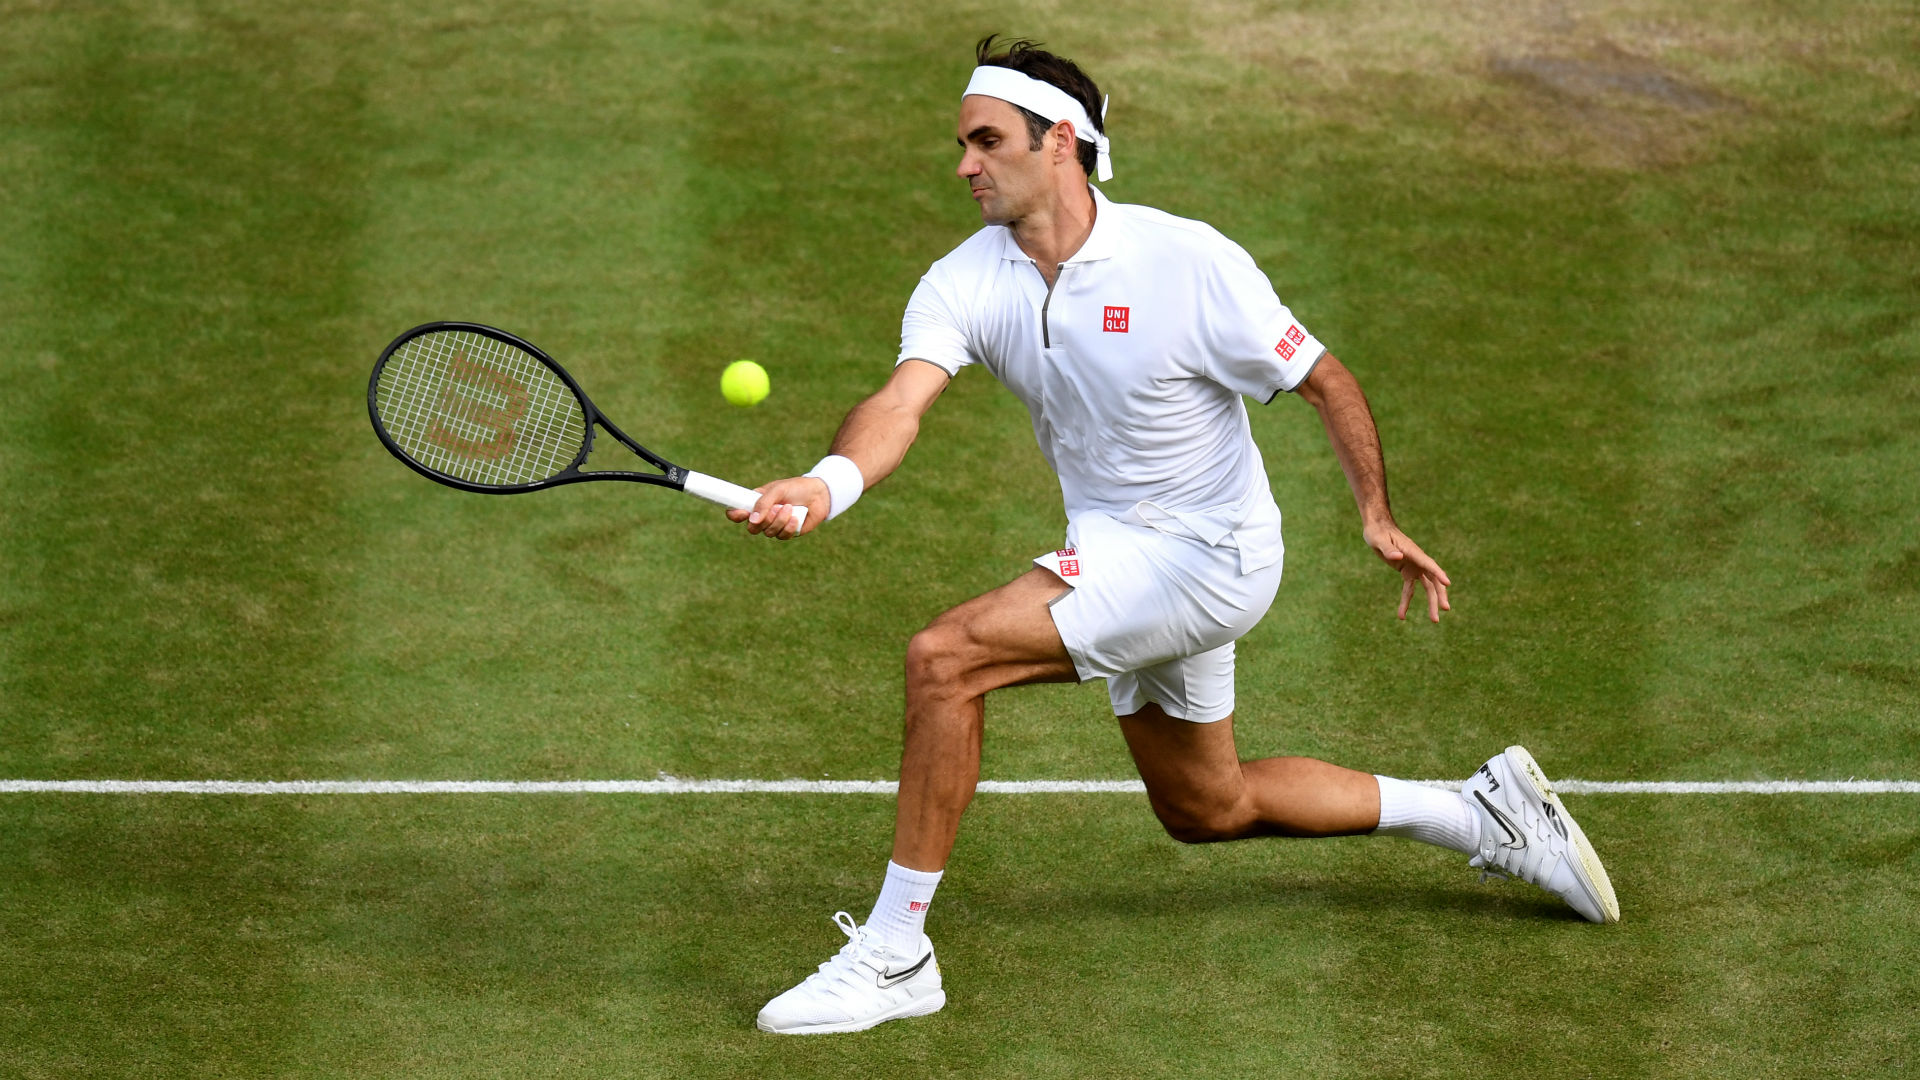 Wimbledon today 05.07. Match schedule, predictions & betting tips